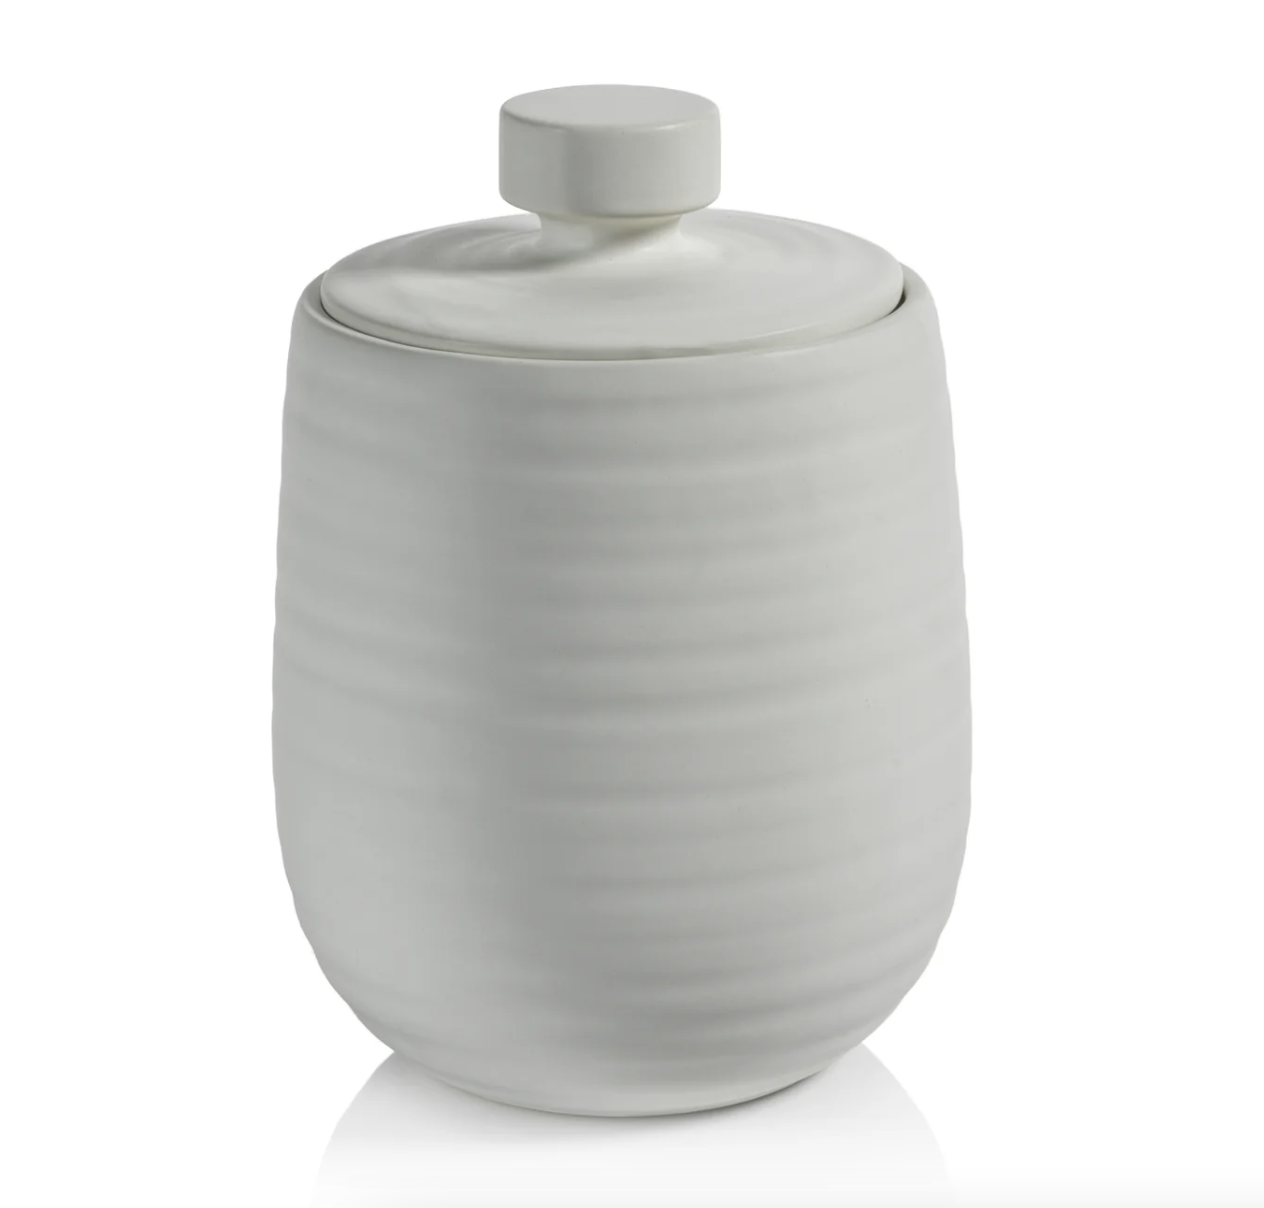 A white ceramic Arpège Lidded Jar - Medium with a smooth, rounded body featuring vertical ridges and a flat, round lid with a simple knob handle, isolated on a white background, embodying Zodax style.